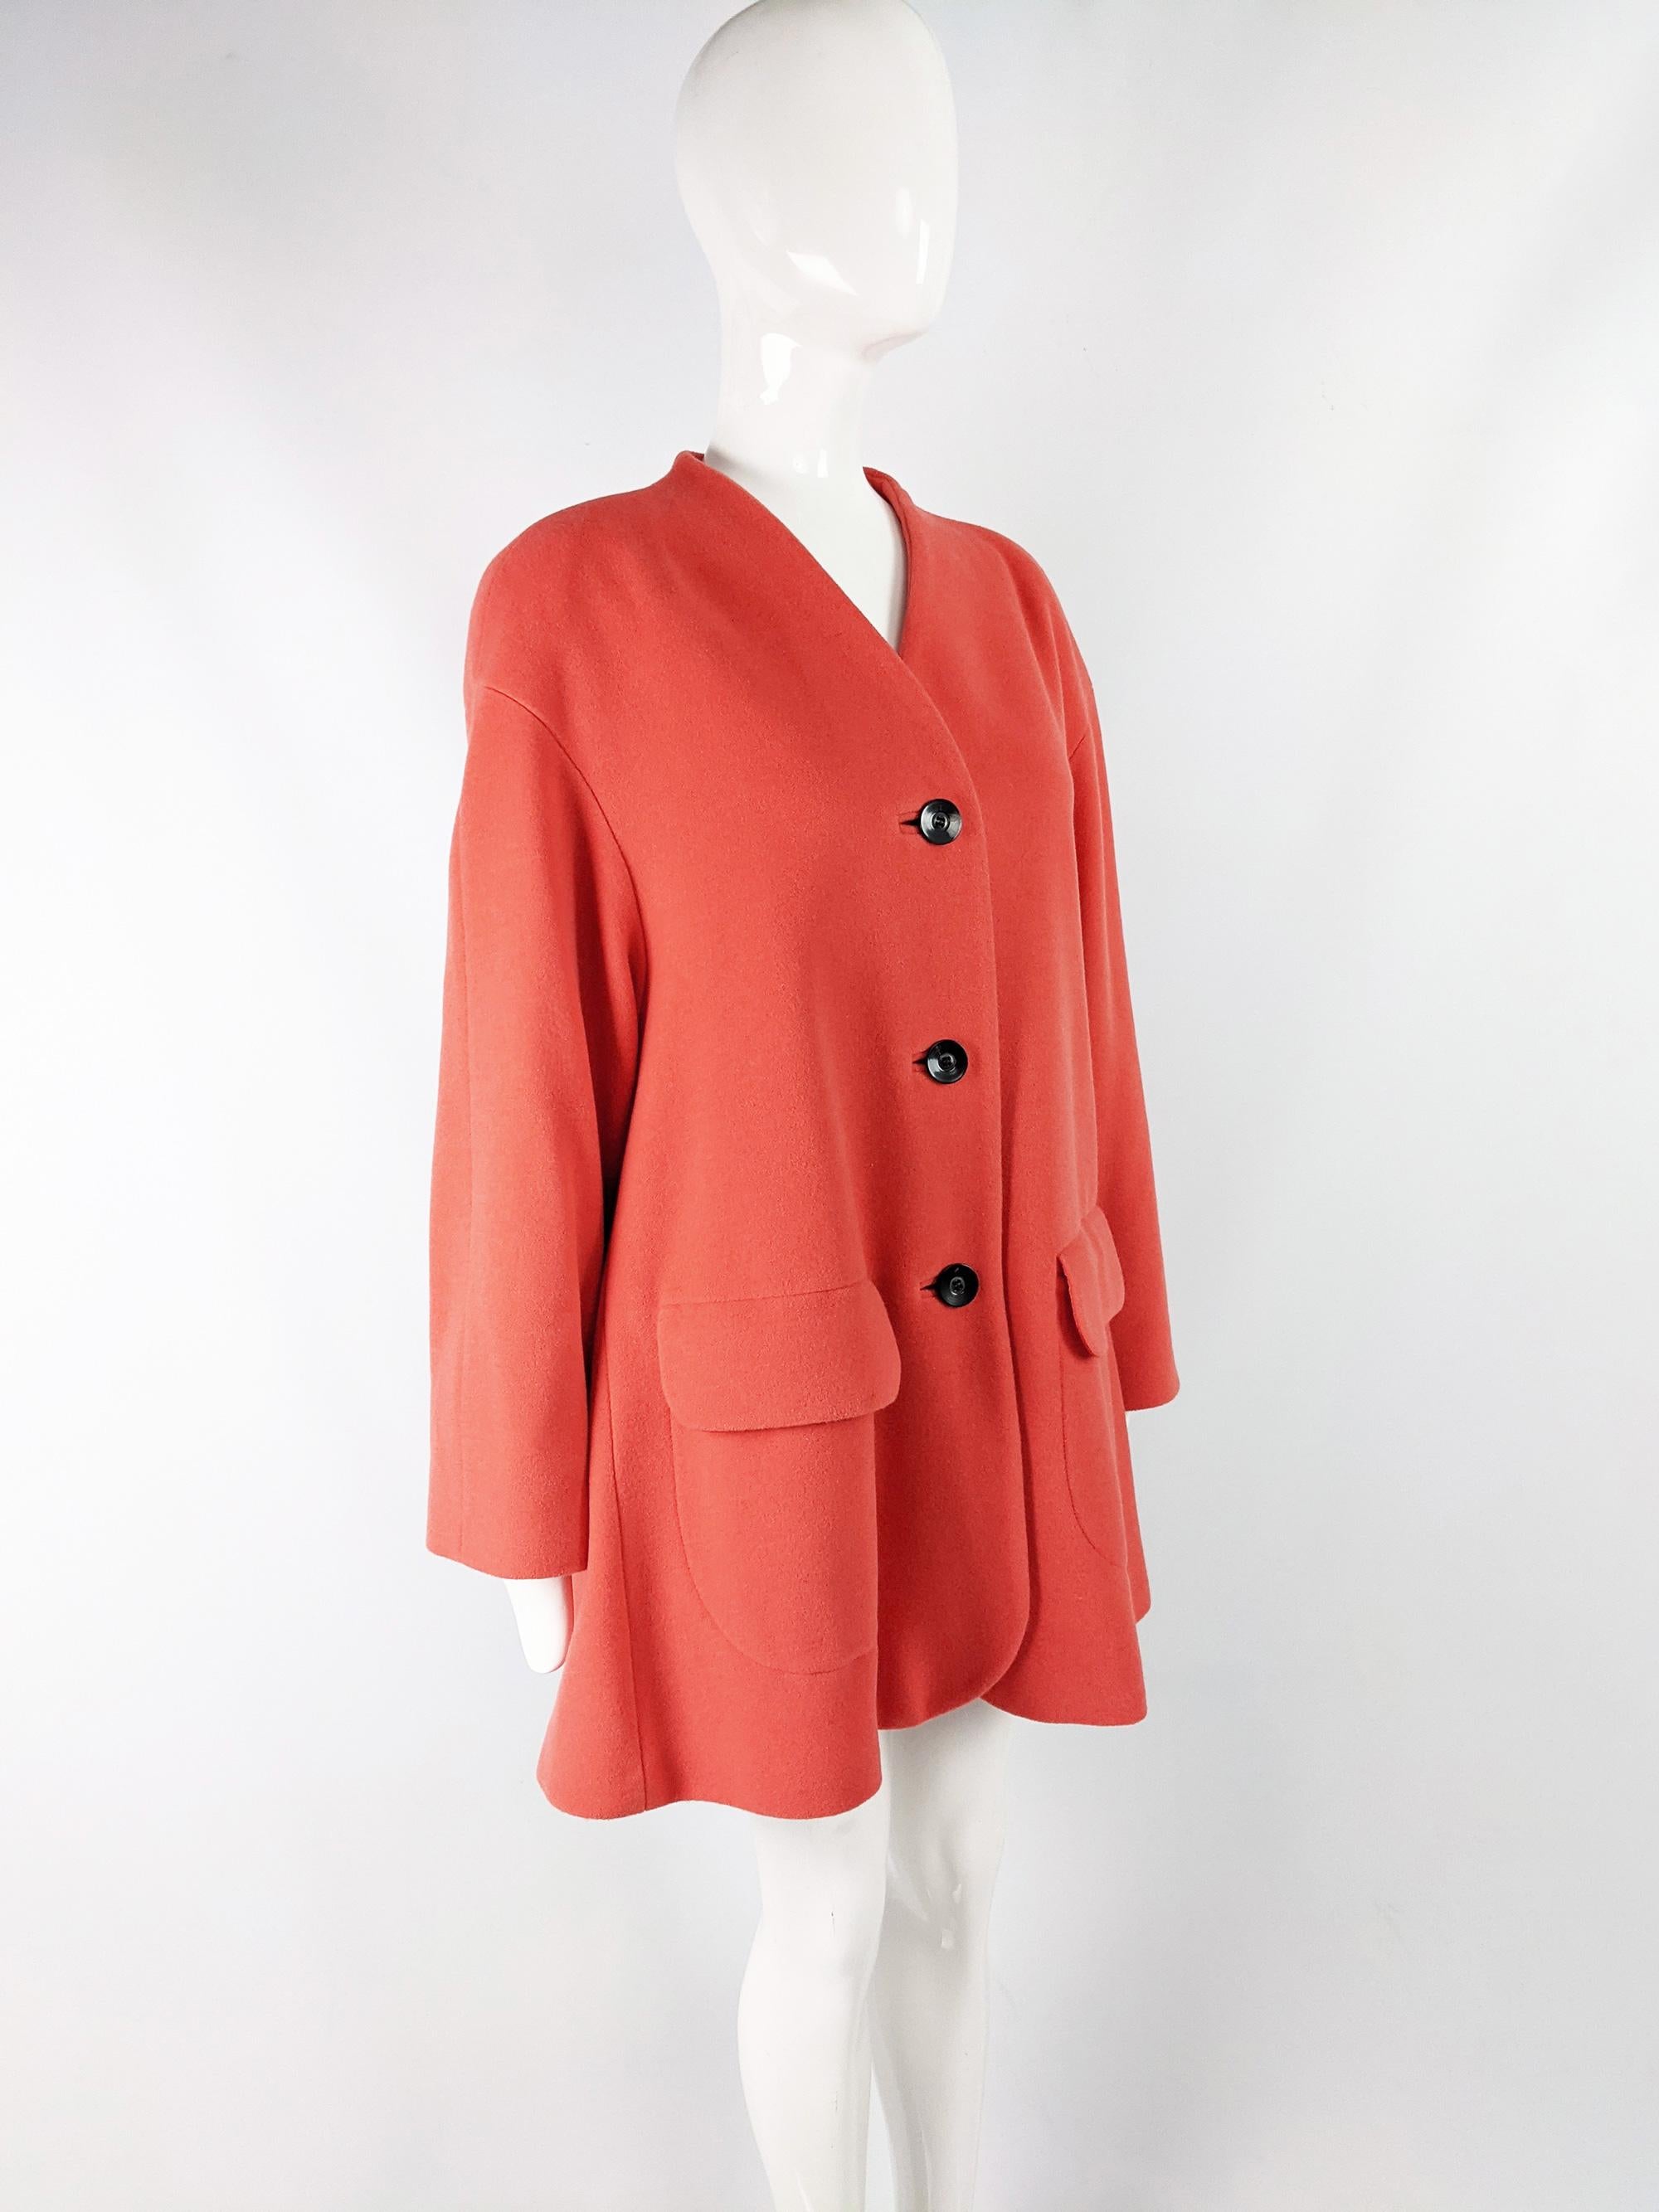 Escada Vintage Coral Cashmere Wool & Angora Swing Trapeze Coat, 1980s In Good Condition For Sale In Doncaster, South Yorkshire